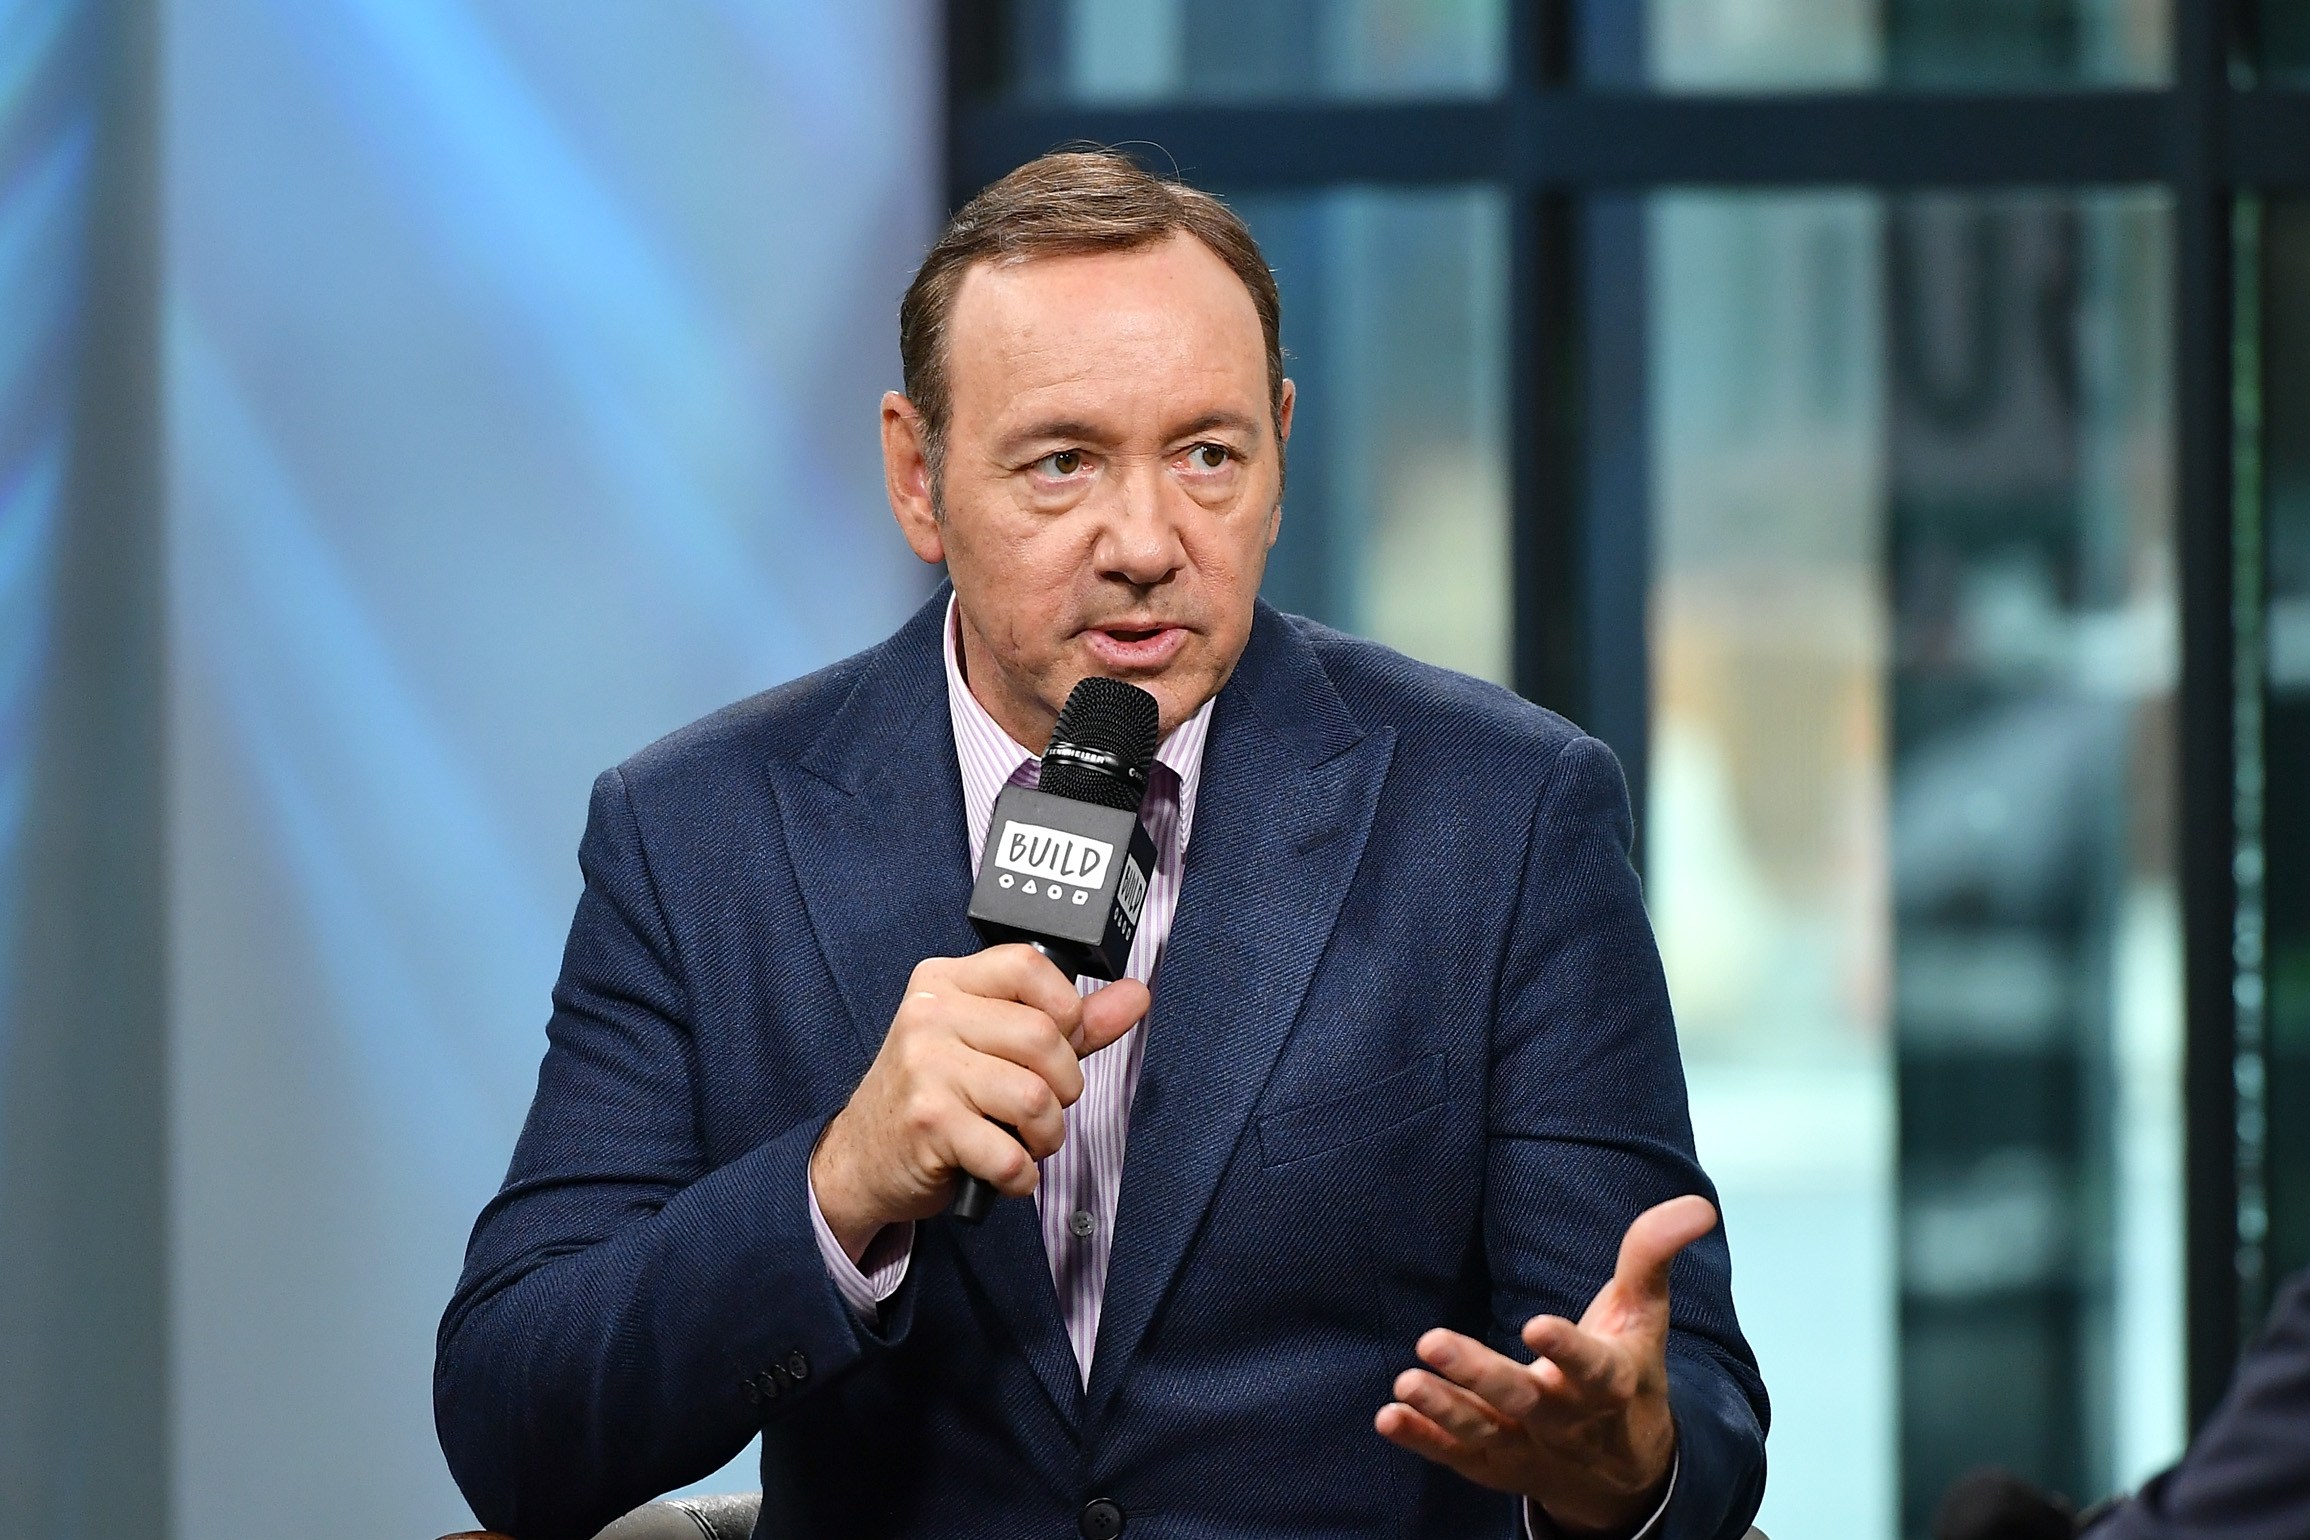 Here are all 50+ sexual misconduct allegations against Kevin Spacey